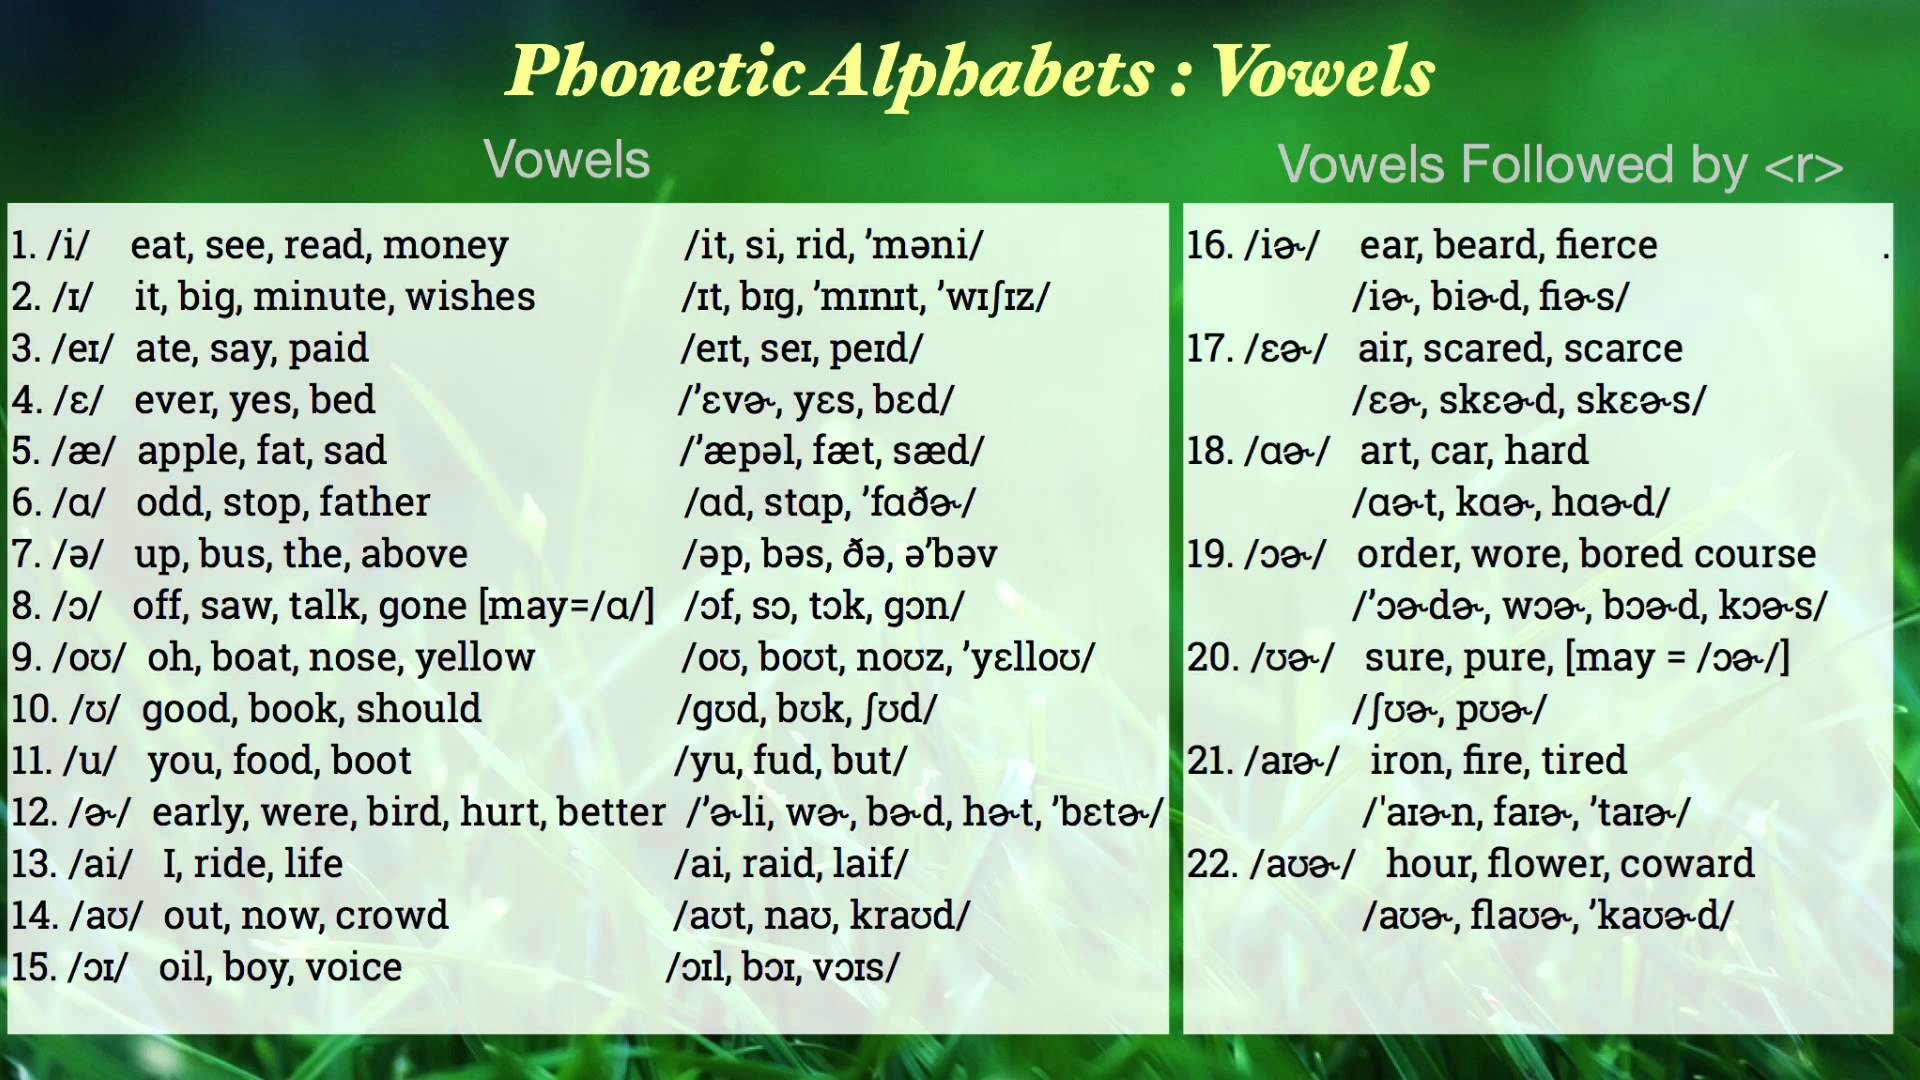 1920x1080 English Phonetic Alphabets : Vowels with Pronunciation.